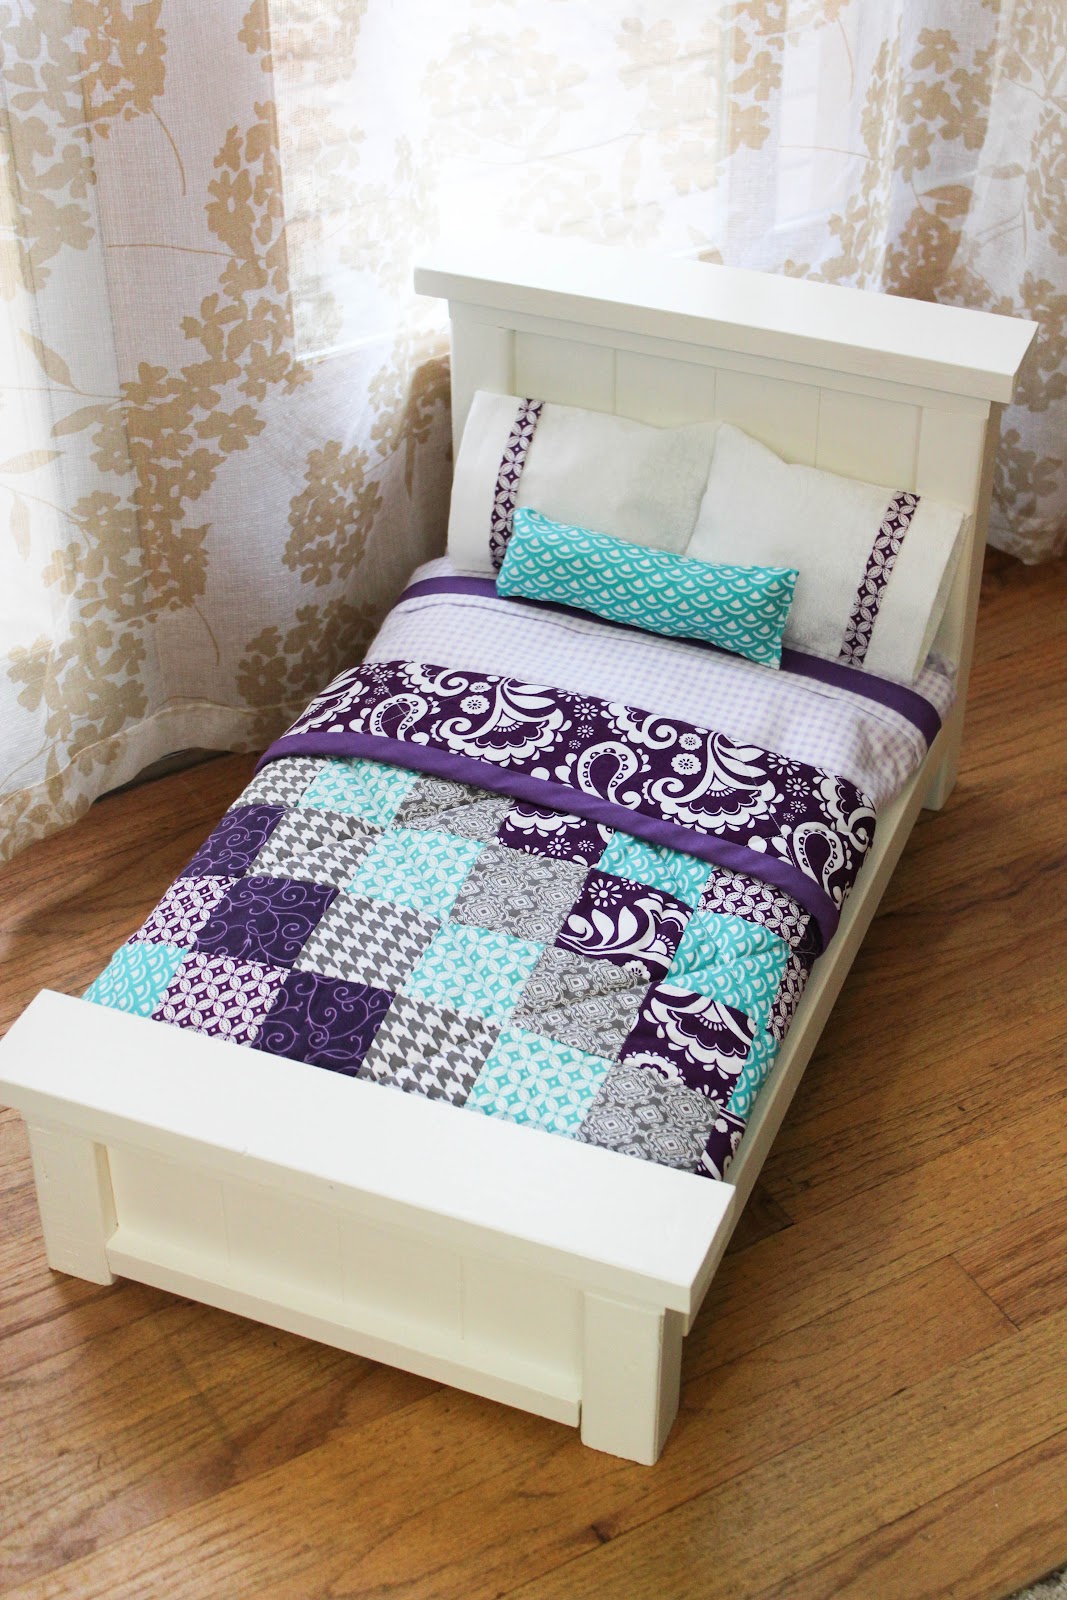 From Dahlias to Doxies: DIY Doll Beds and Tiny Quilts